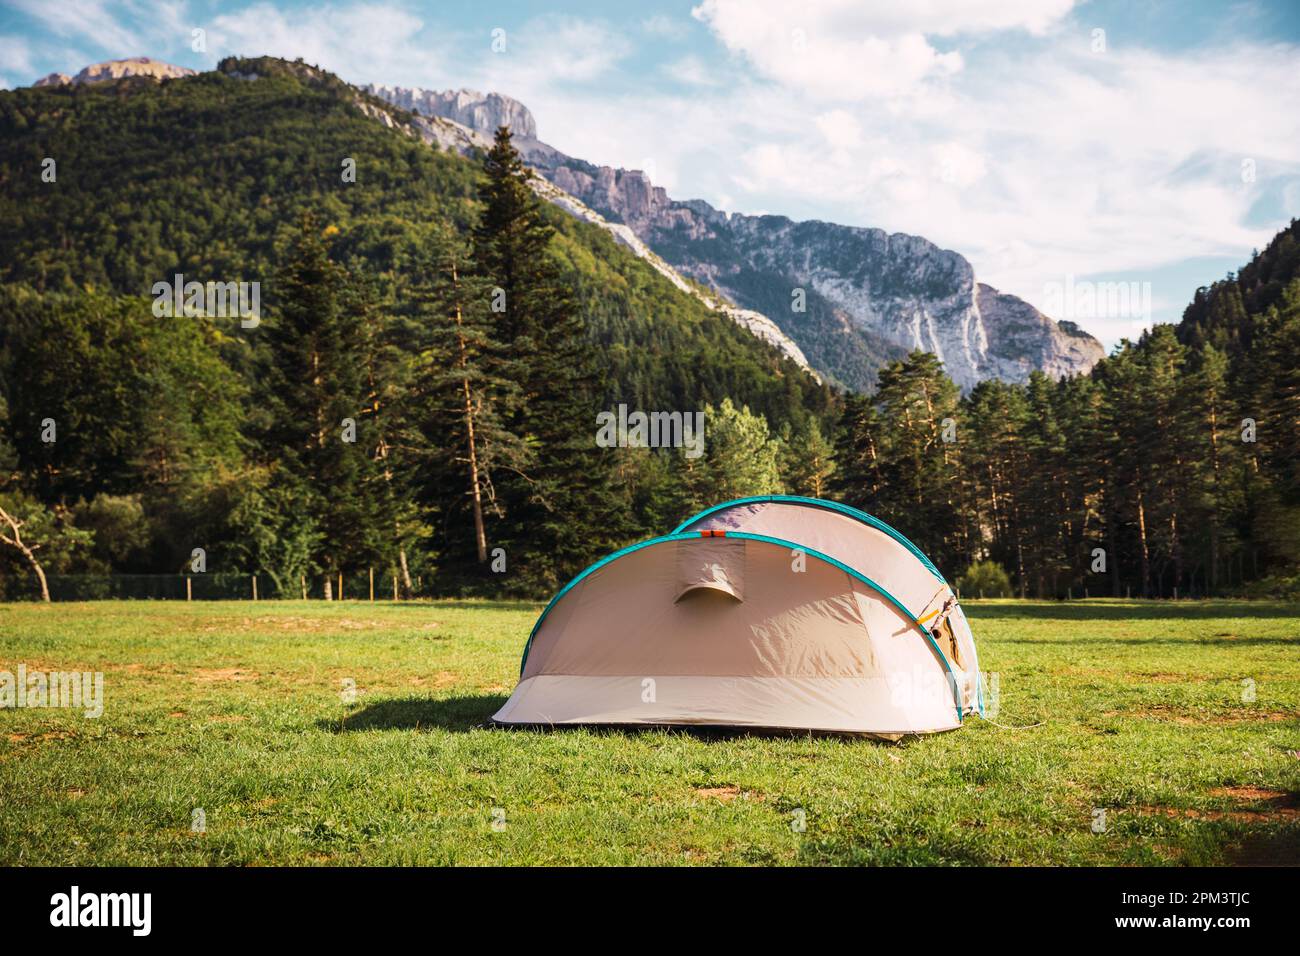 Tent with amazing landscape views of forest and mountains. Camping holiday and outdoor summer vacation. Lifestyle concept Stock Photo